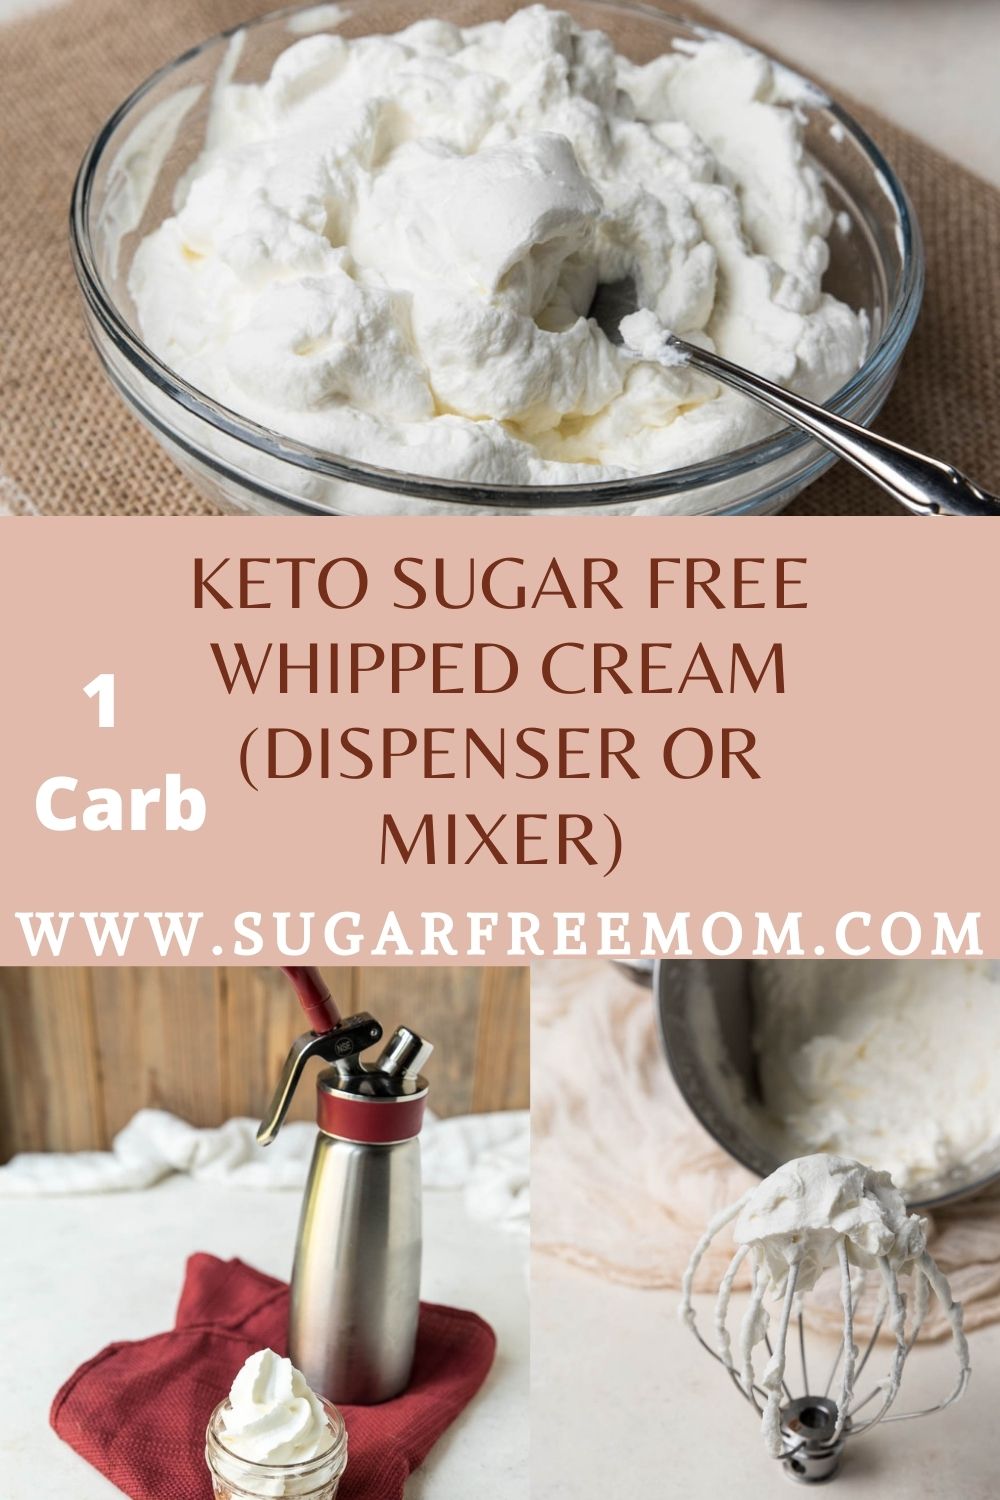 Sugar Free Whipped cream made in a whipped cream dispenser or mixer!